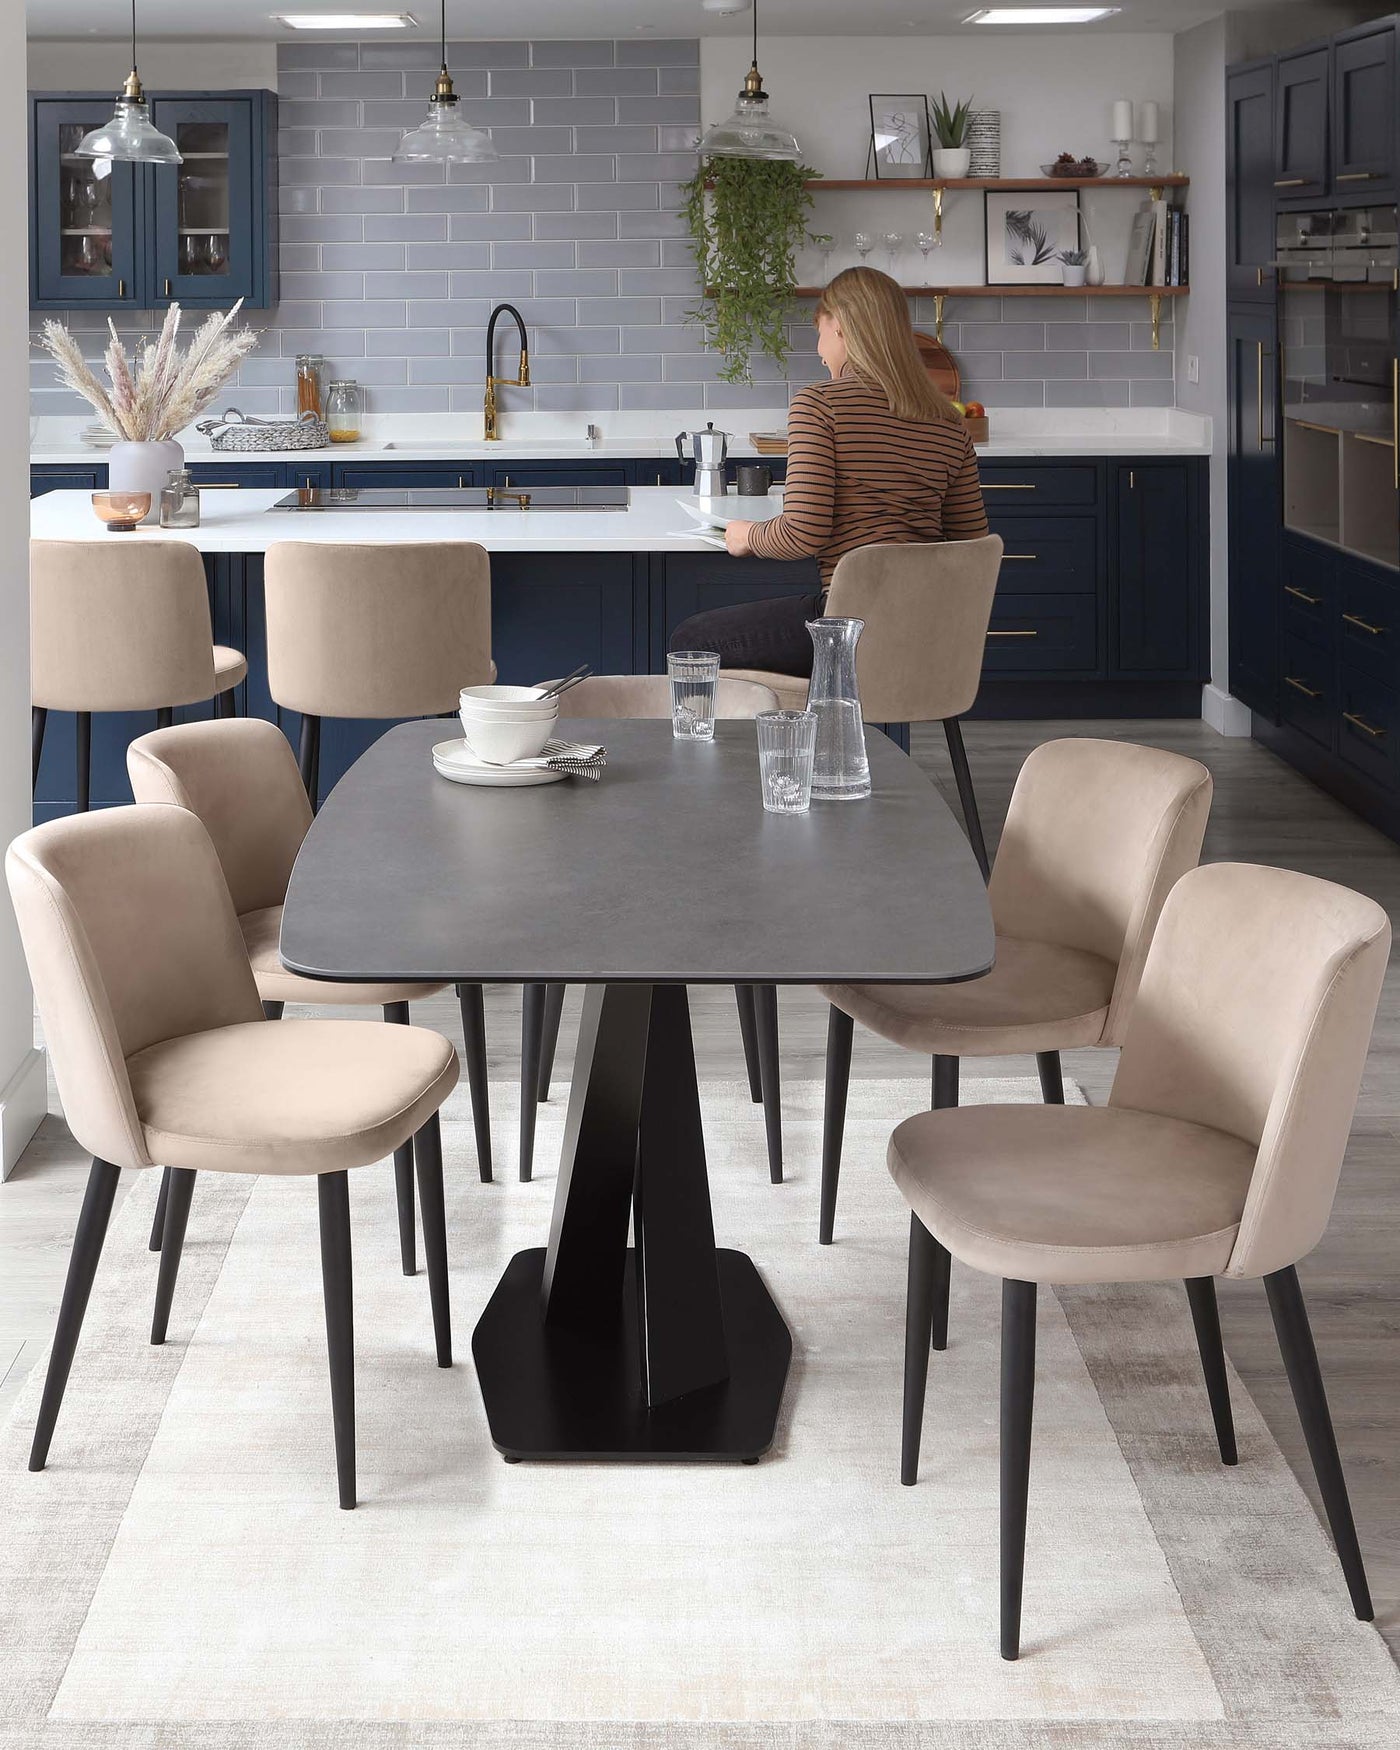 Modern dining set featuring a dark grey round table with a unique geometric black base, surrounded by four sleek upholstered chairs in a light beige fabric with slim black legs on a textured off-white area rug.